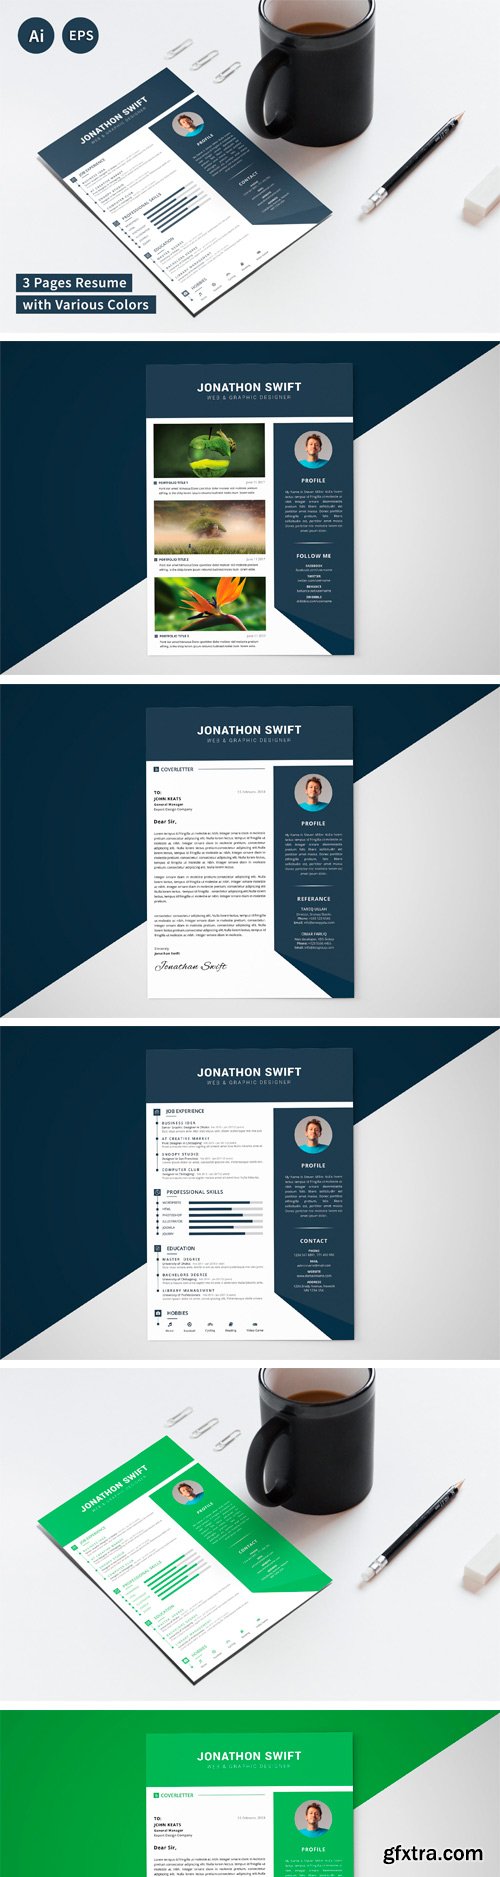 CM - CV/Resume Template (3 Pages) 2315964